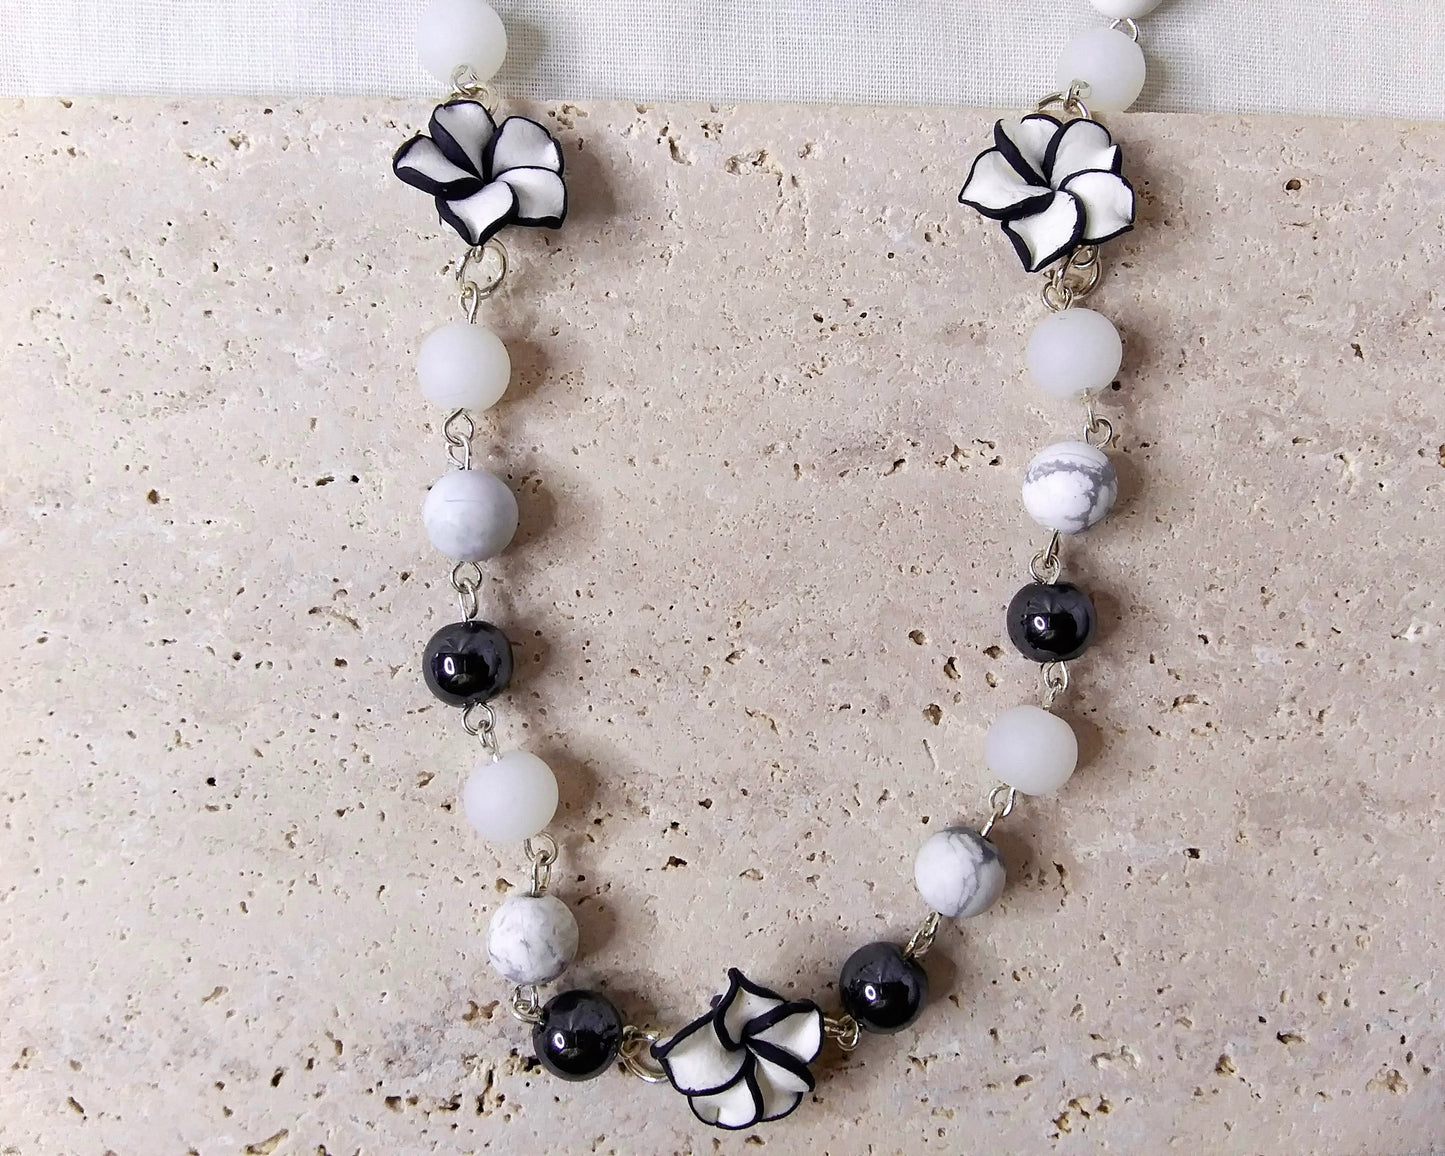 Gemstone Necklace, Silver Necklace, Hematite, howlite, white glass beads. Poly clay flower shape beads